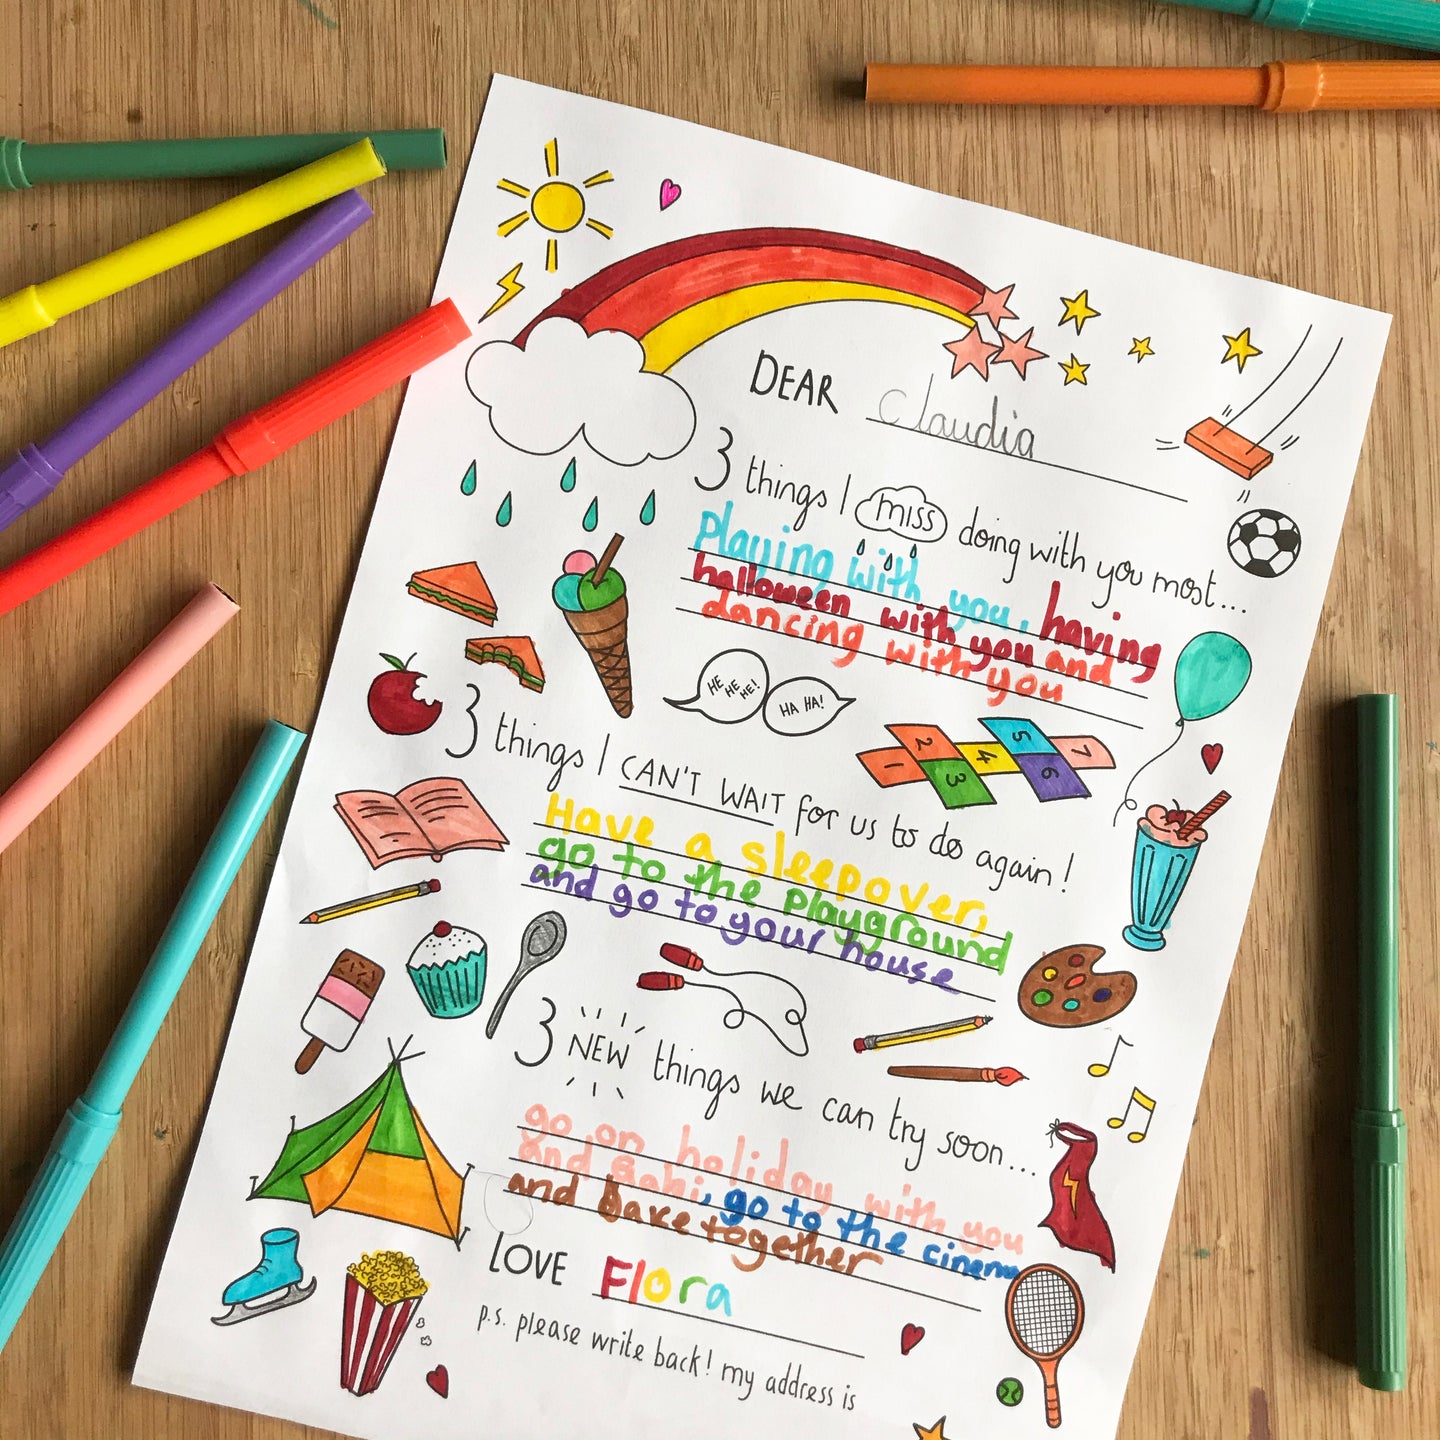 Post Pals lockdown letter - FREE colouring download